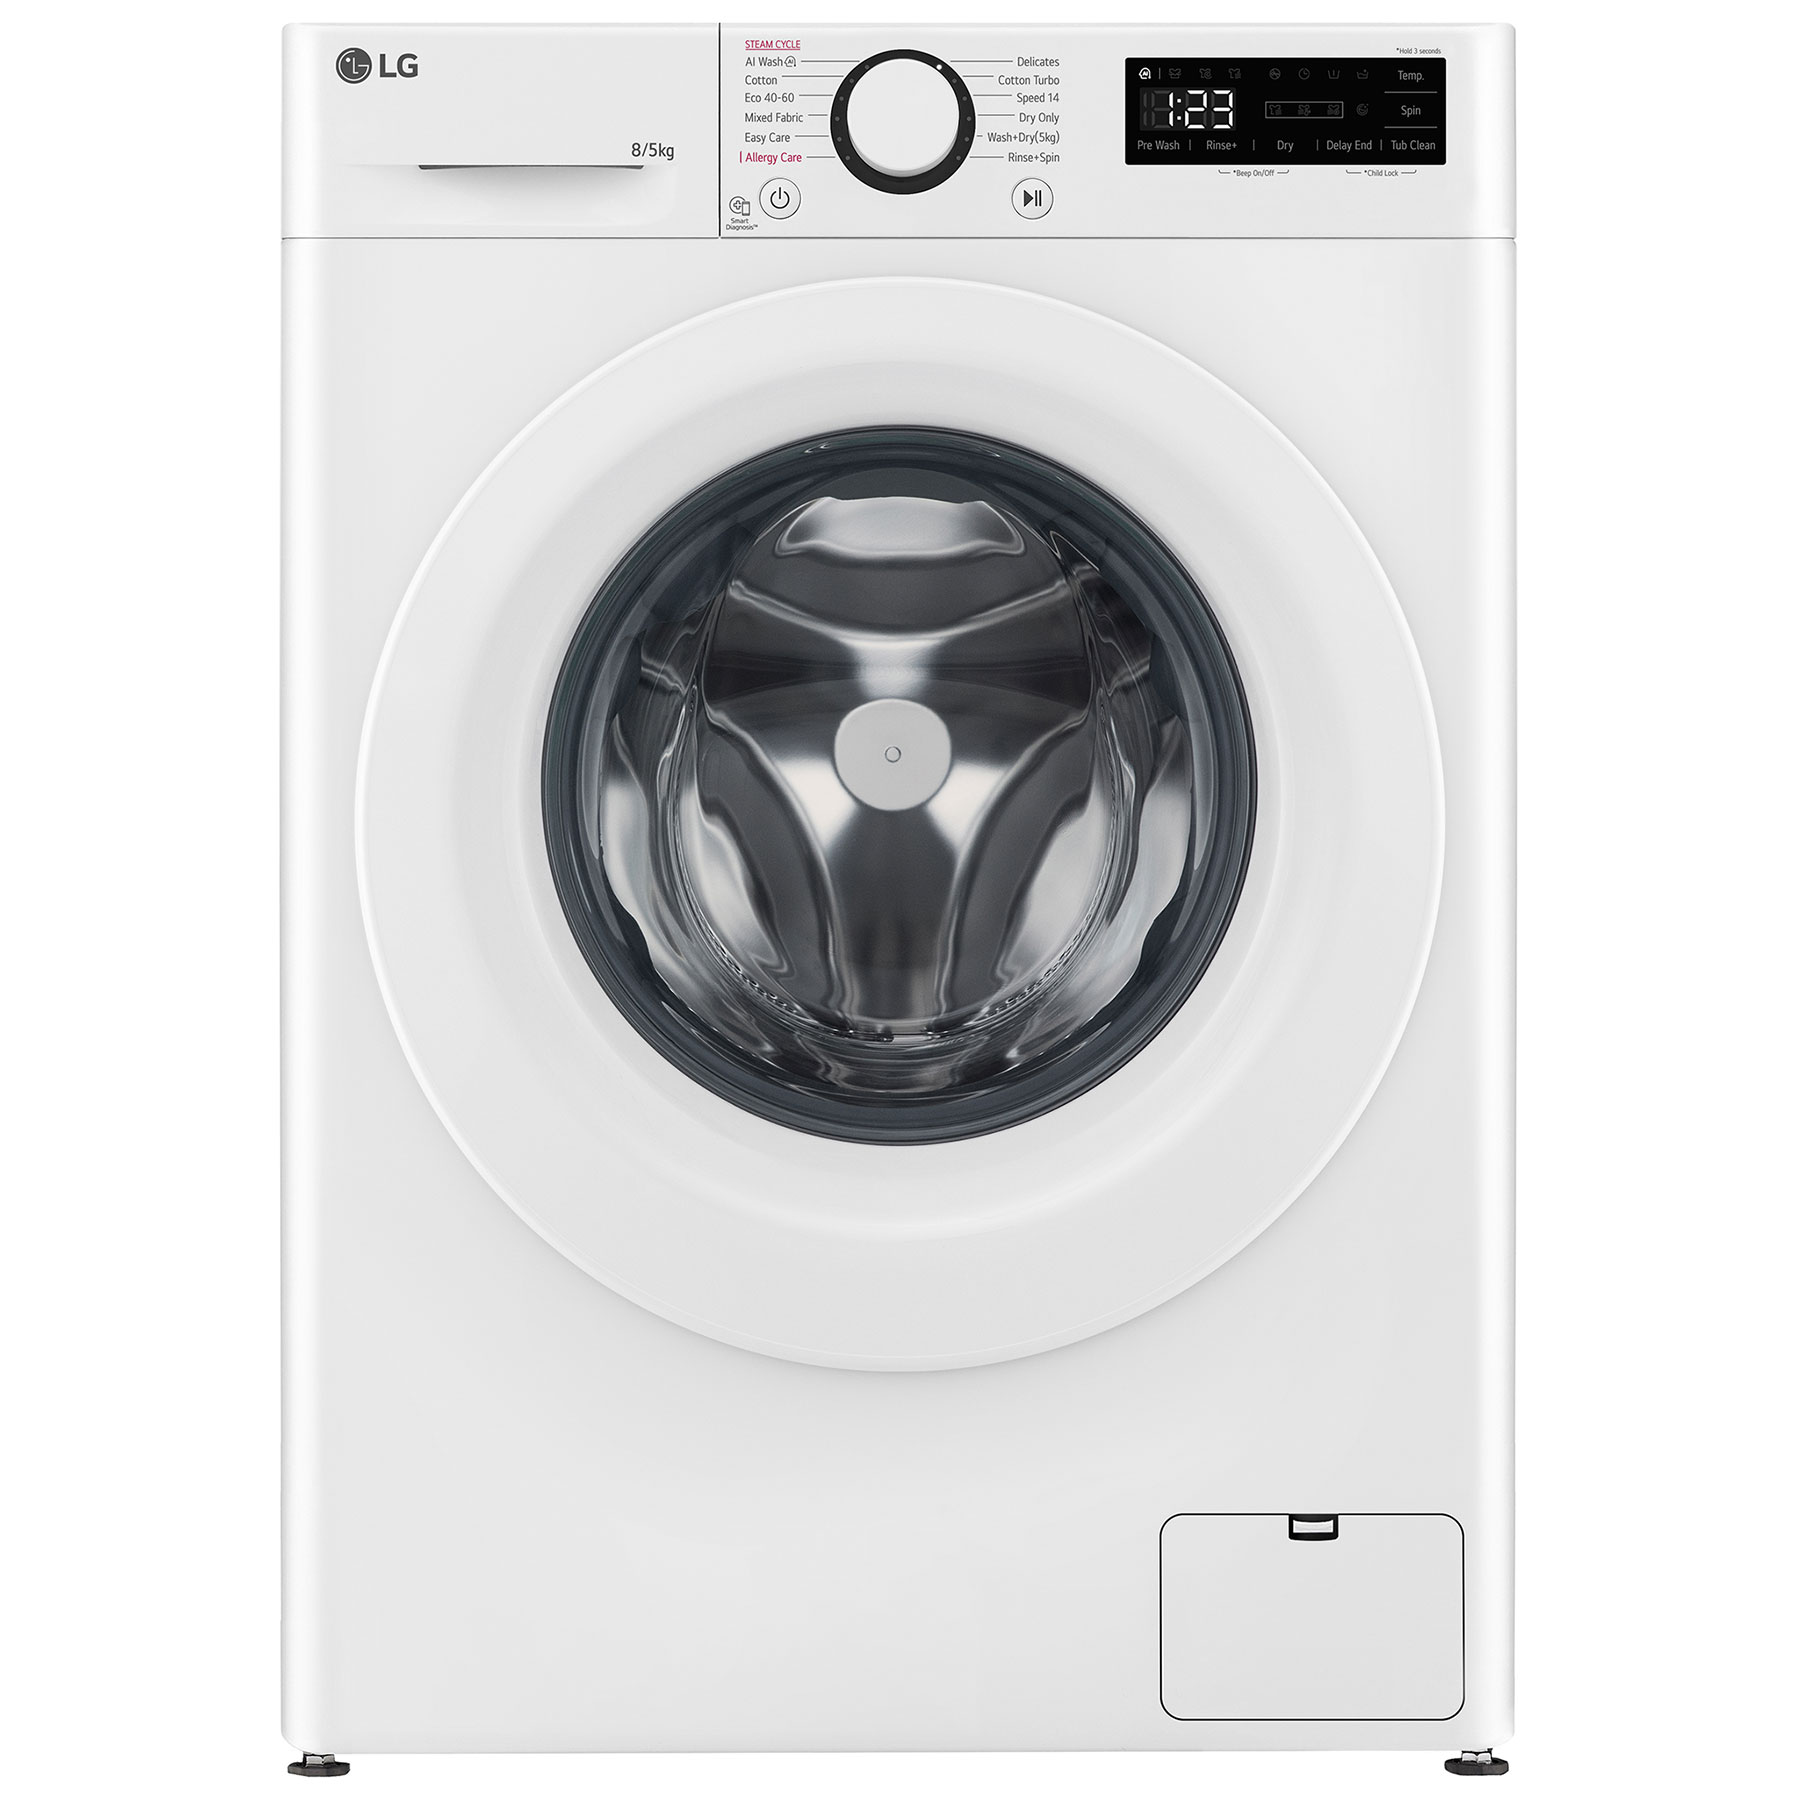 Image of LG FWY385WWLN1 Washer Dryer in White 1400rpm 8 5kg E Rated